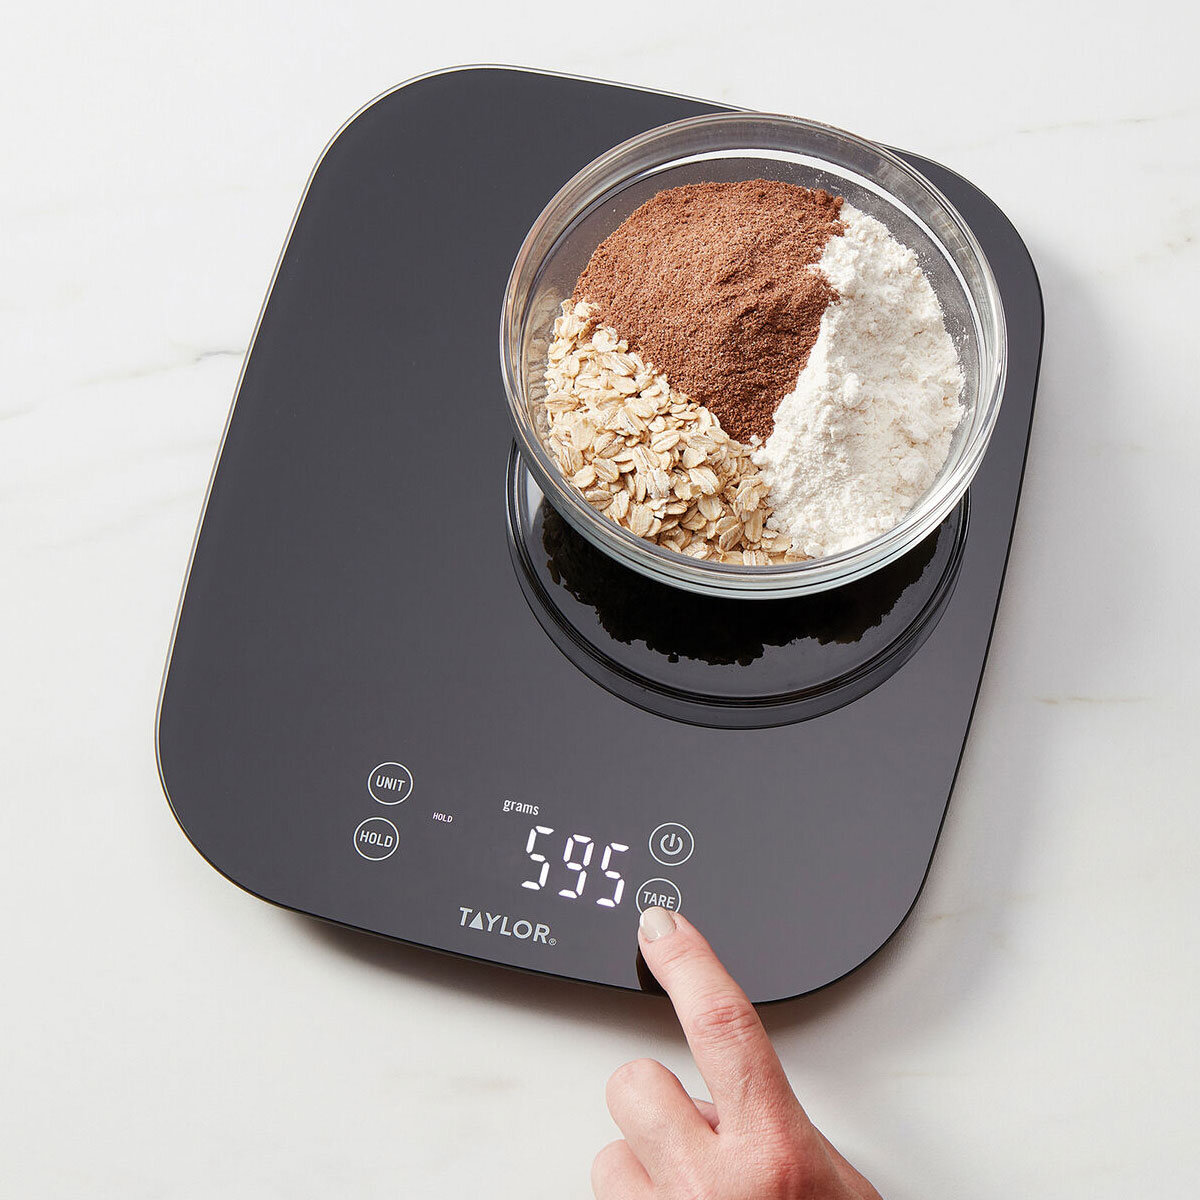 Lifestyle image of scale with food